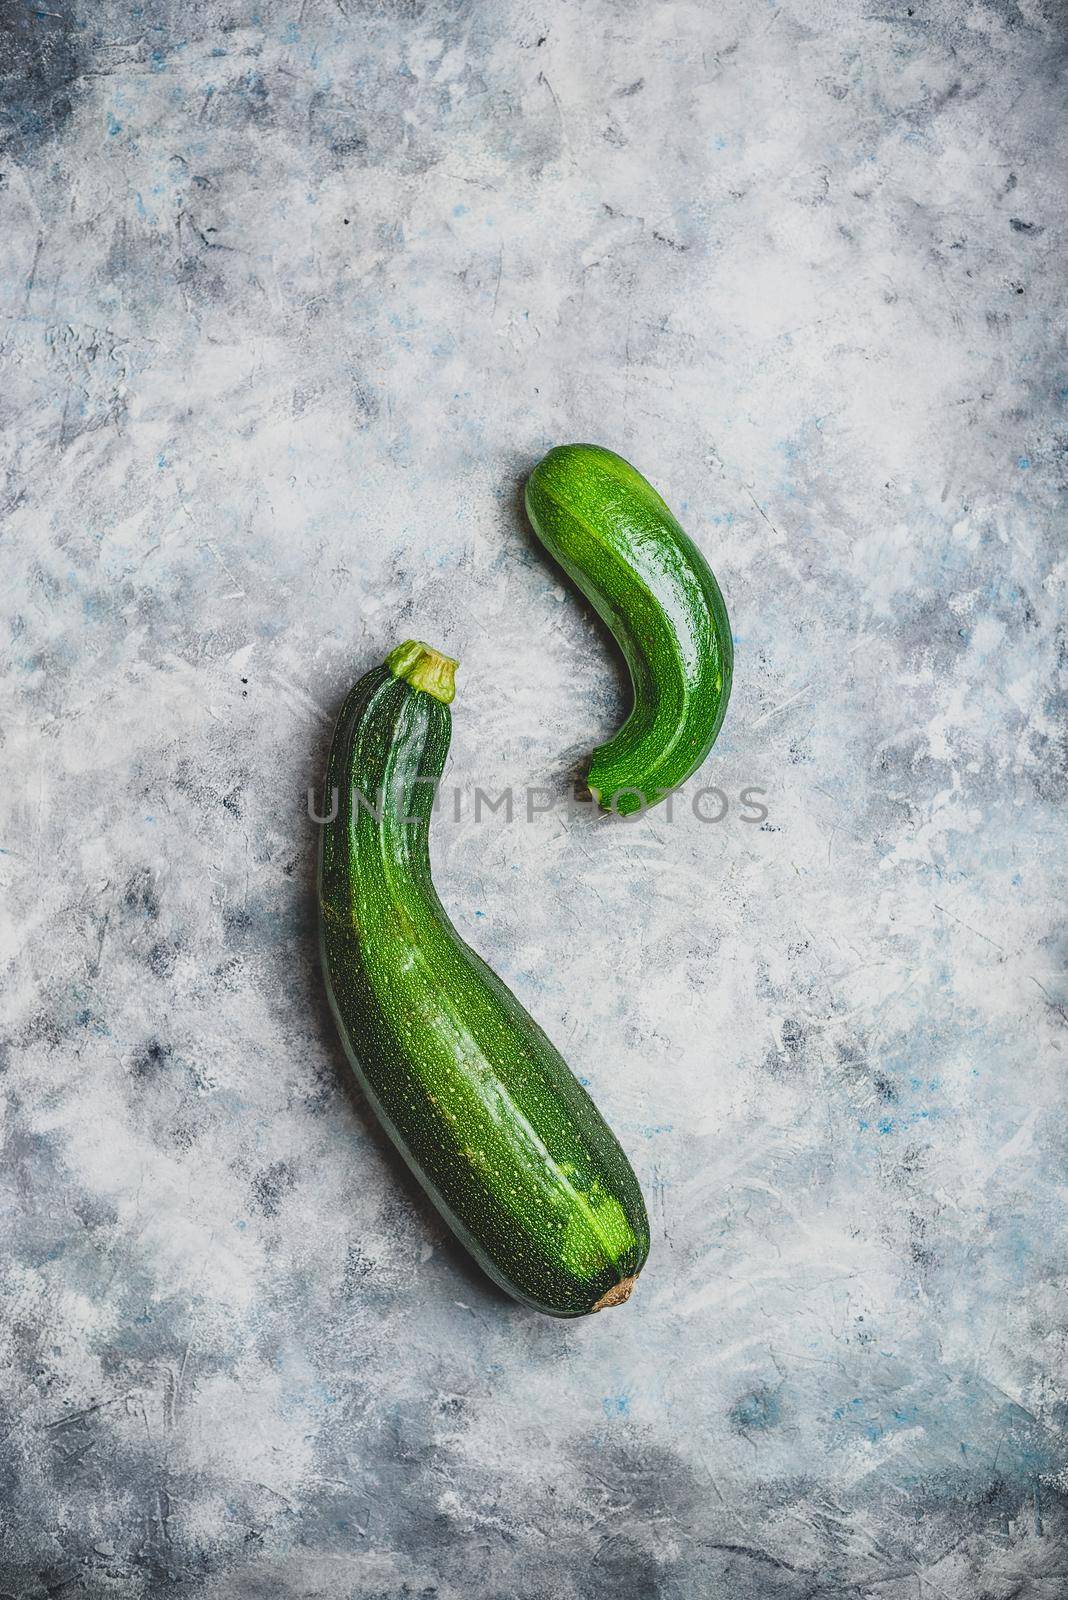 Two fresh organic zucchini on a concrete background. View from above